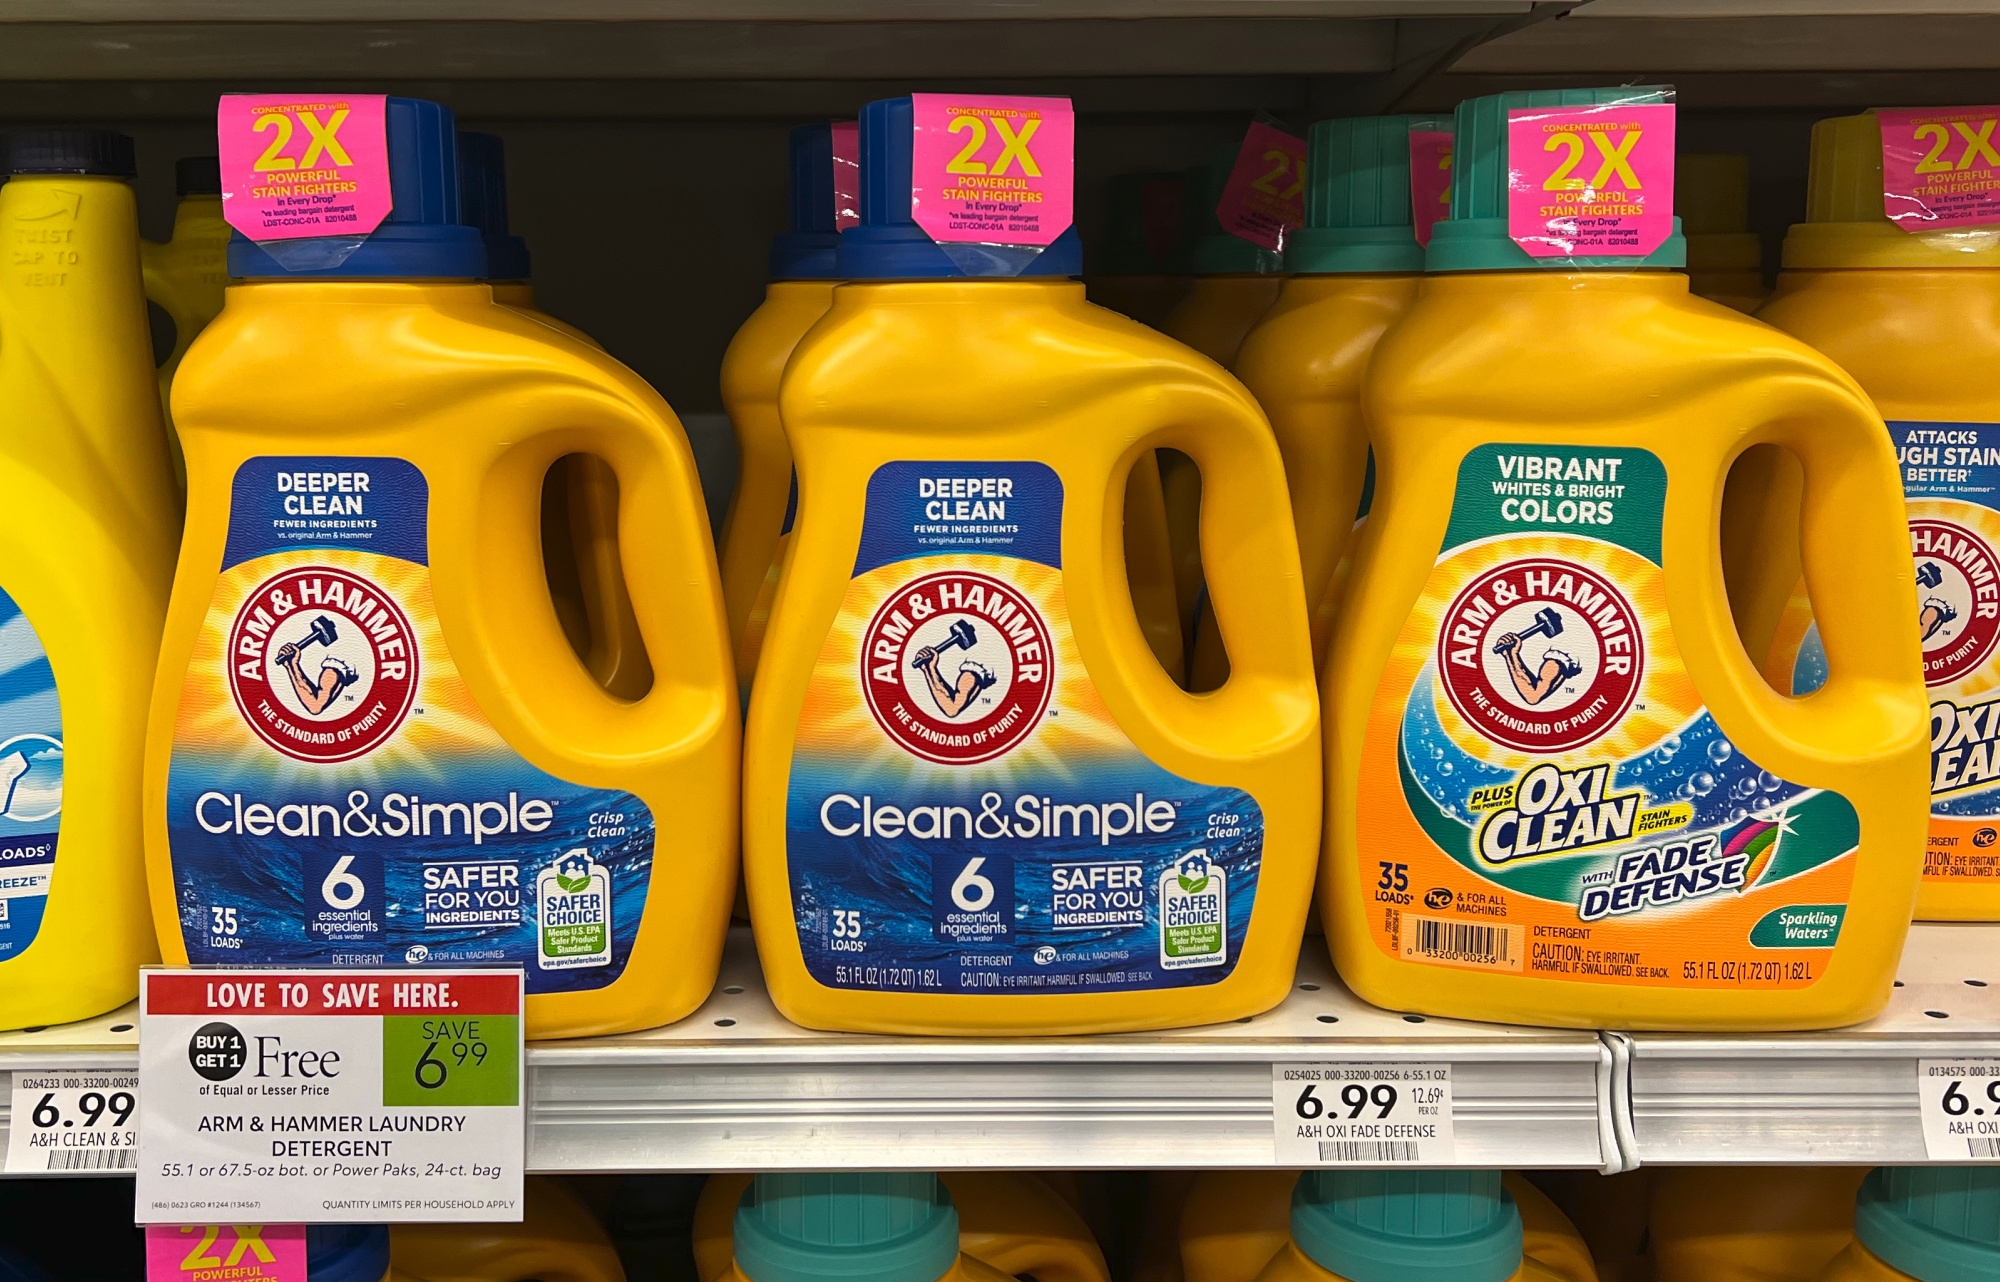 Arm Hammer Laundry Detergent Just 1 50 At Publix IHeartPublix - Free Printable Arm and Hammer Coupons